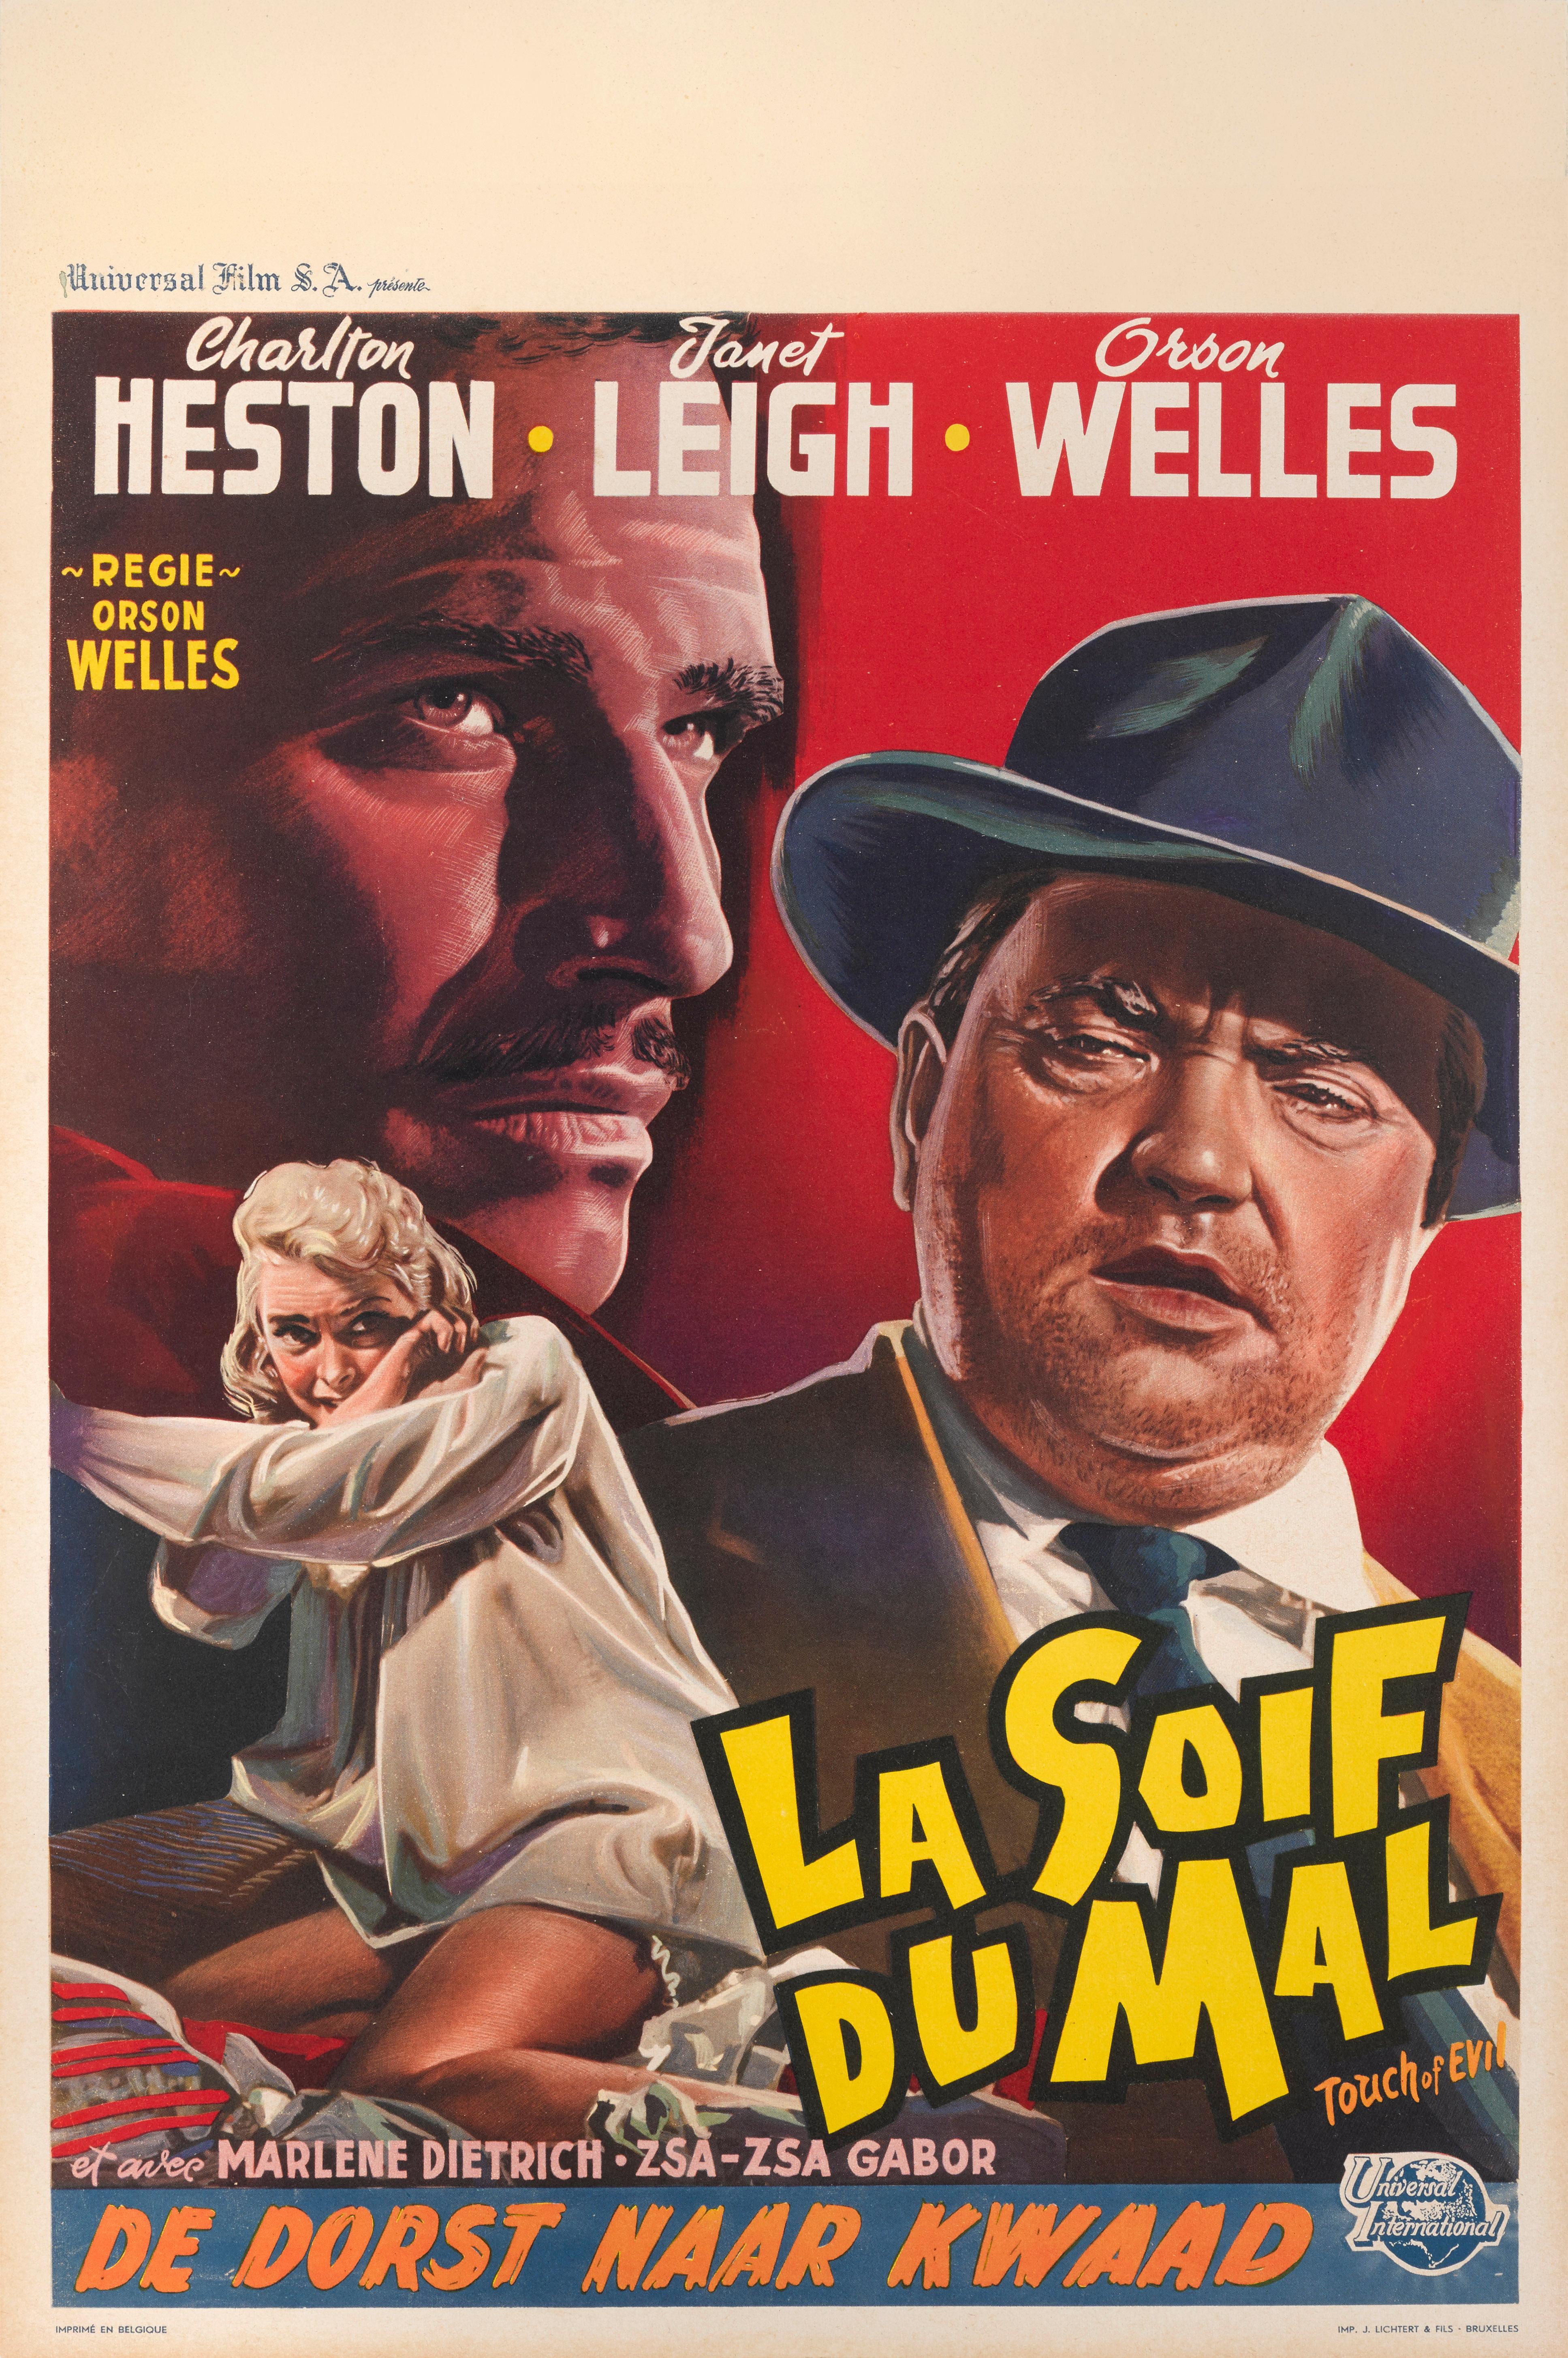 Original Belgian film poster for Orson Welles 1958 Film Noir.
As well as directing this film Orson Welles starred in it along side Charlton Heston and Janet Leigh.
This poster is conservation linen backed. It would be shipped rolled in a very strong